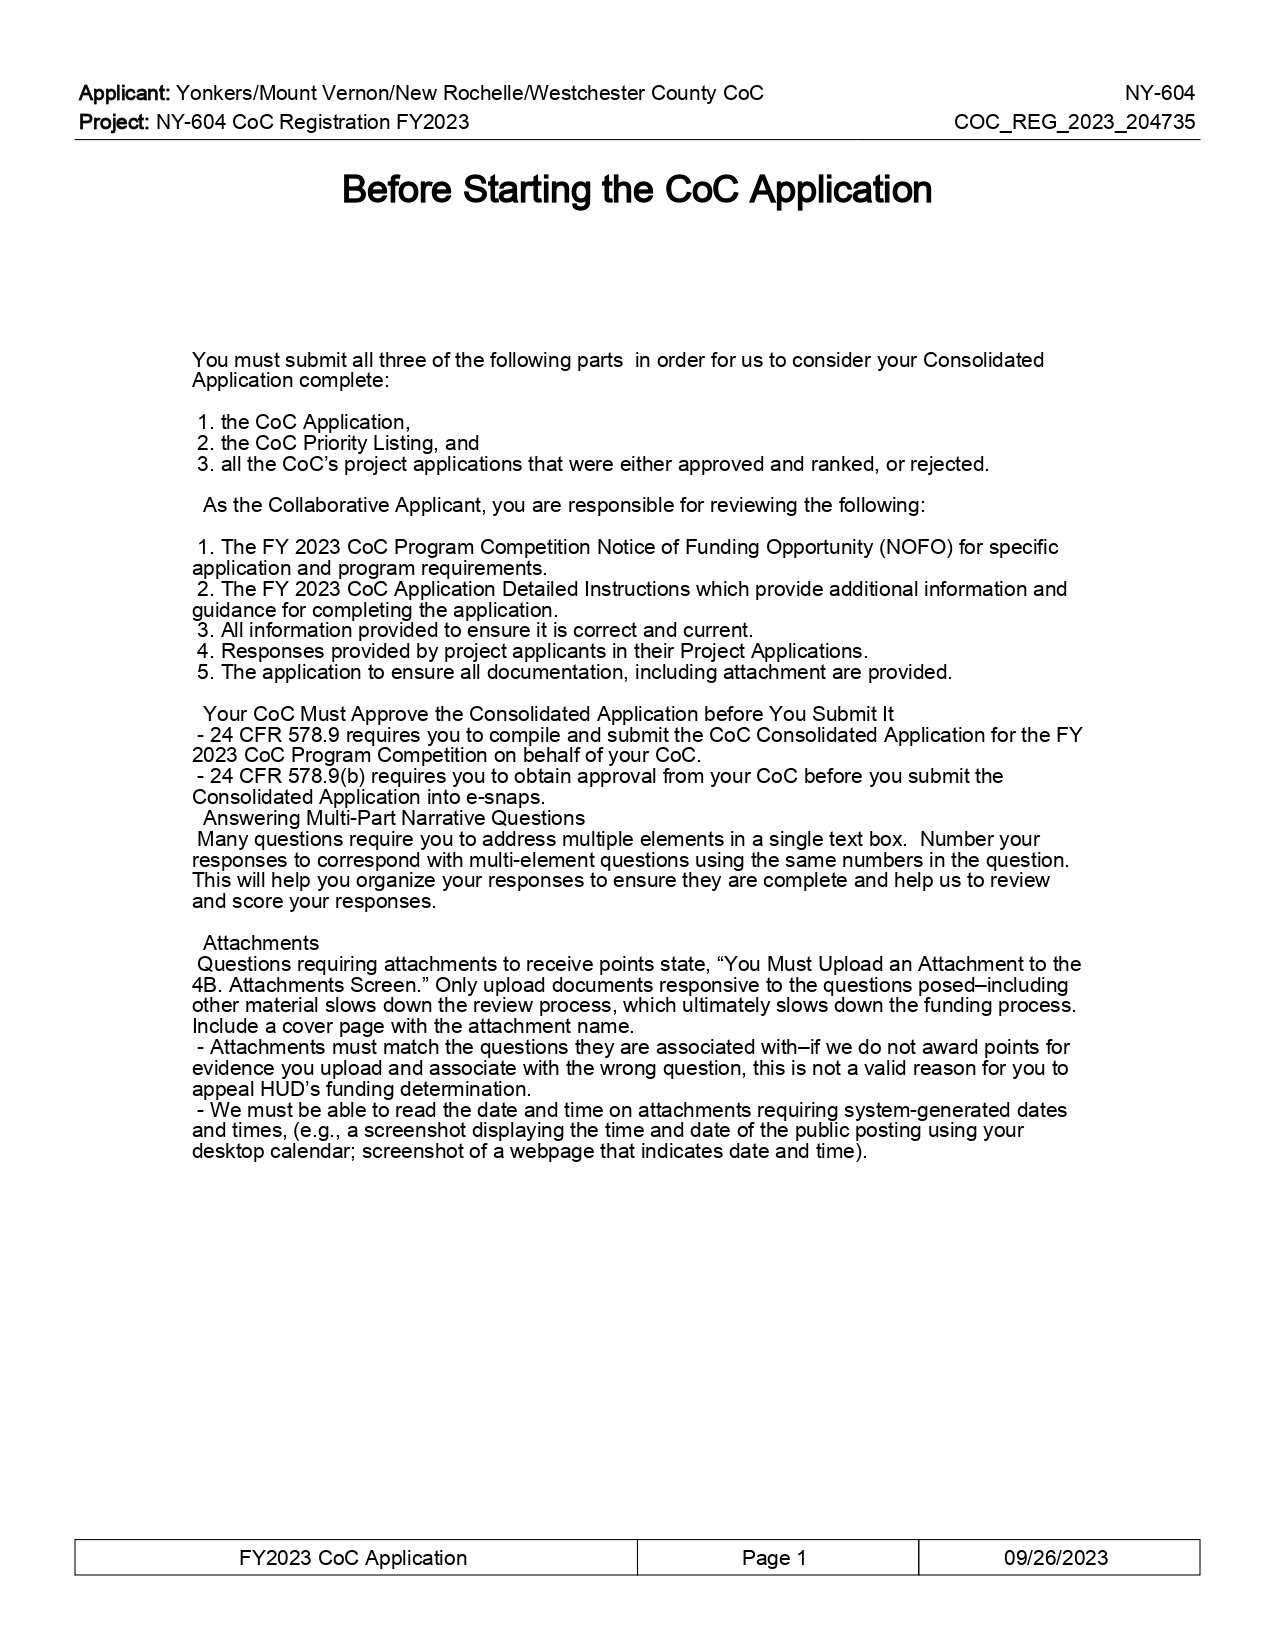 NY-604 FY2023 CoC Application1-1_page-0001.jpg